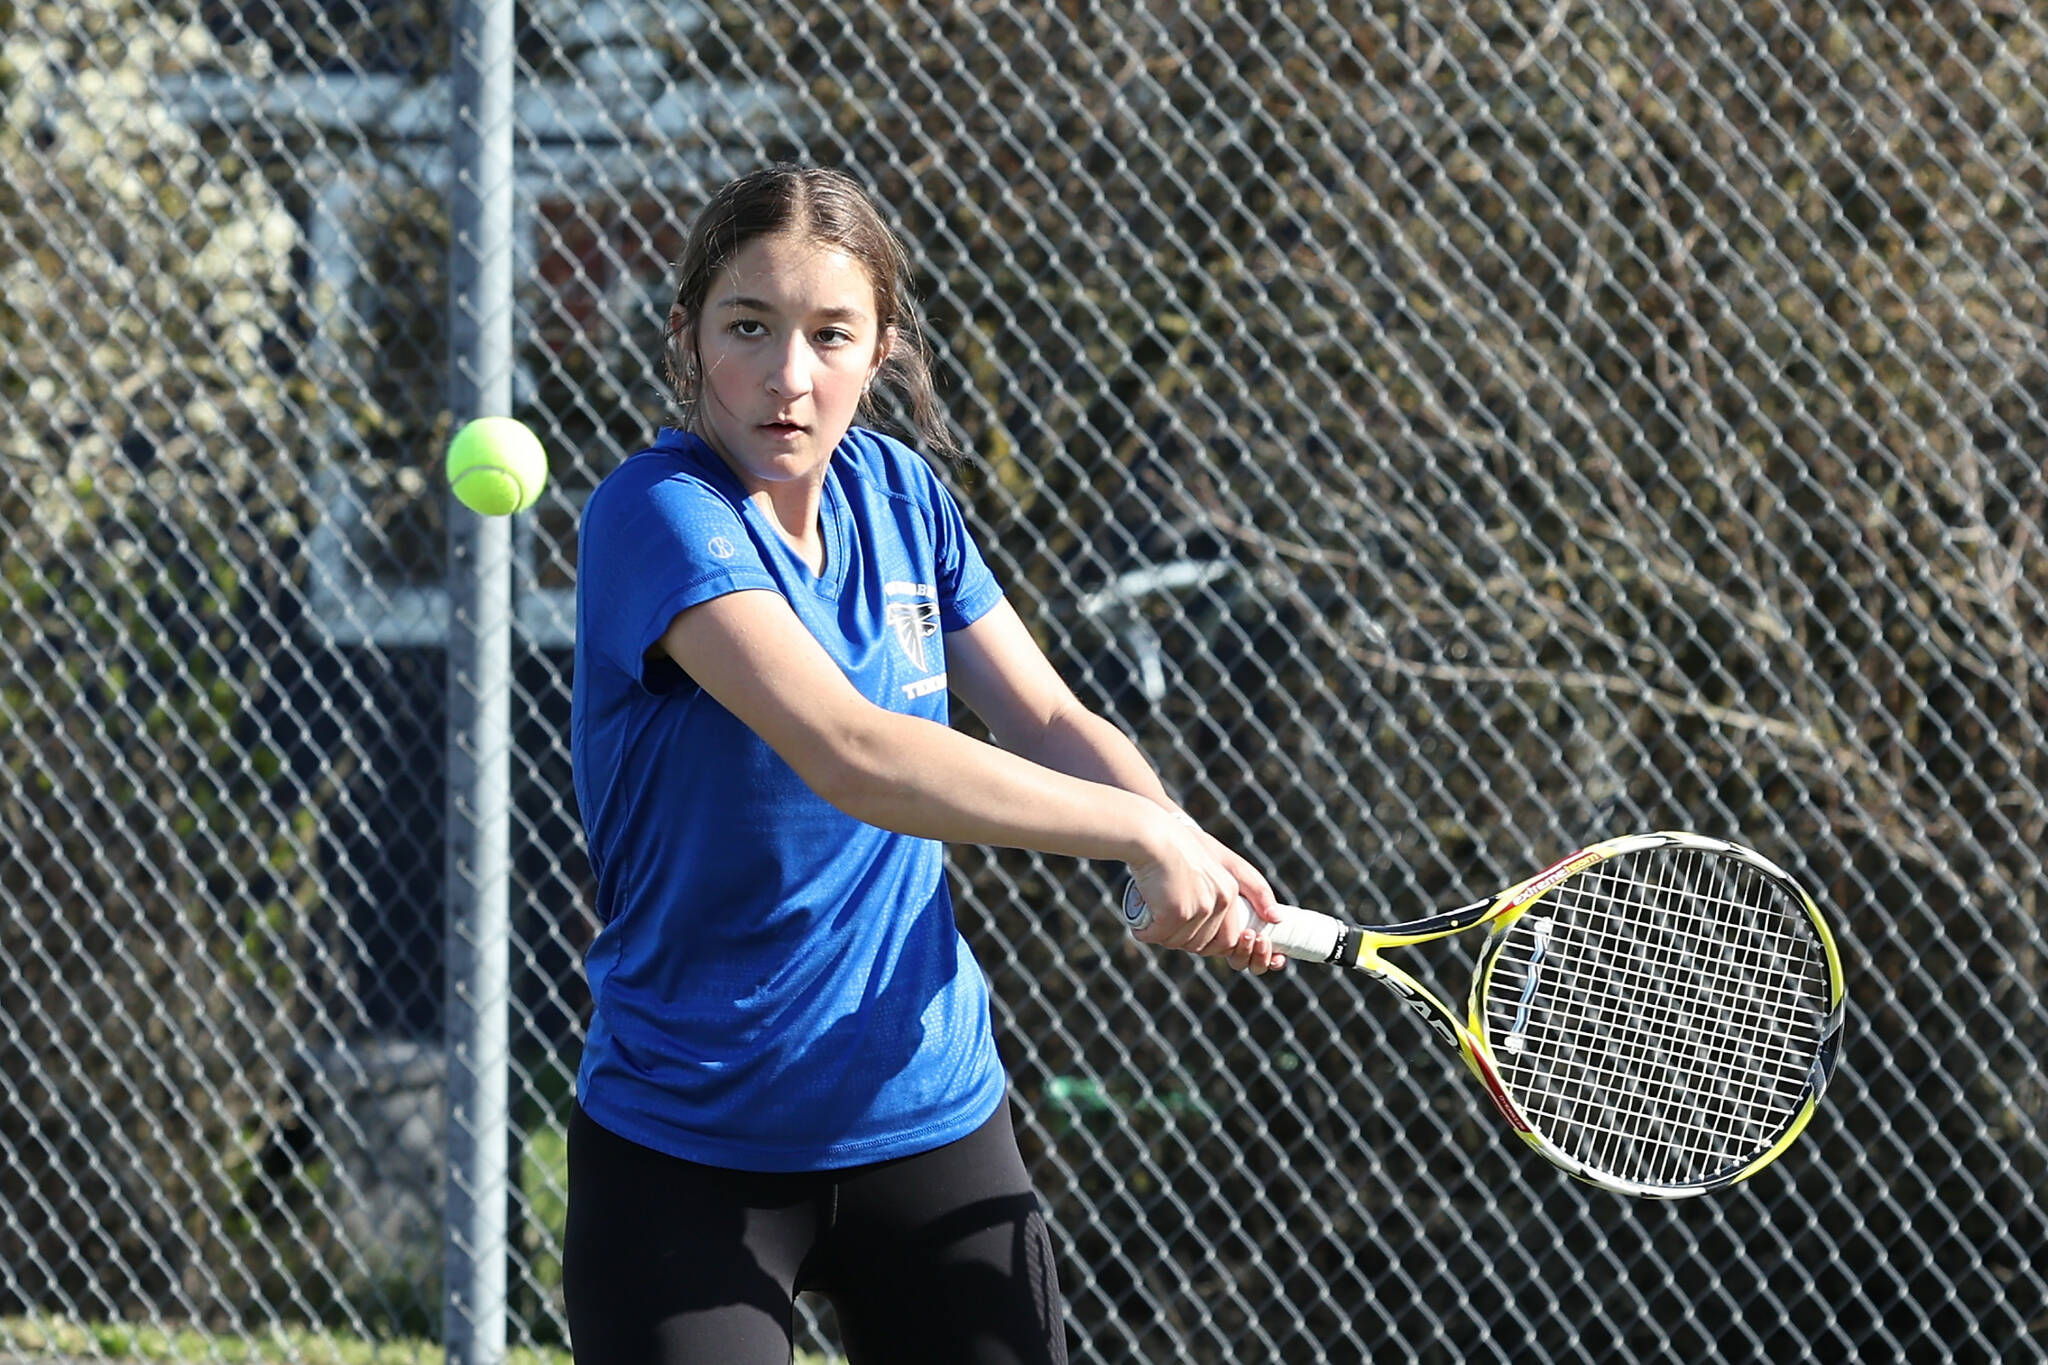 Photo by John Fisken
Junior Mikaela Nelson played 1st doubles with fellow junior Pearl Buck and won 6-2, 6-1.